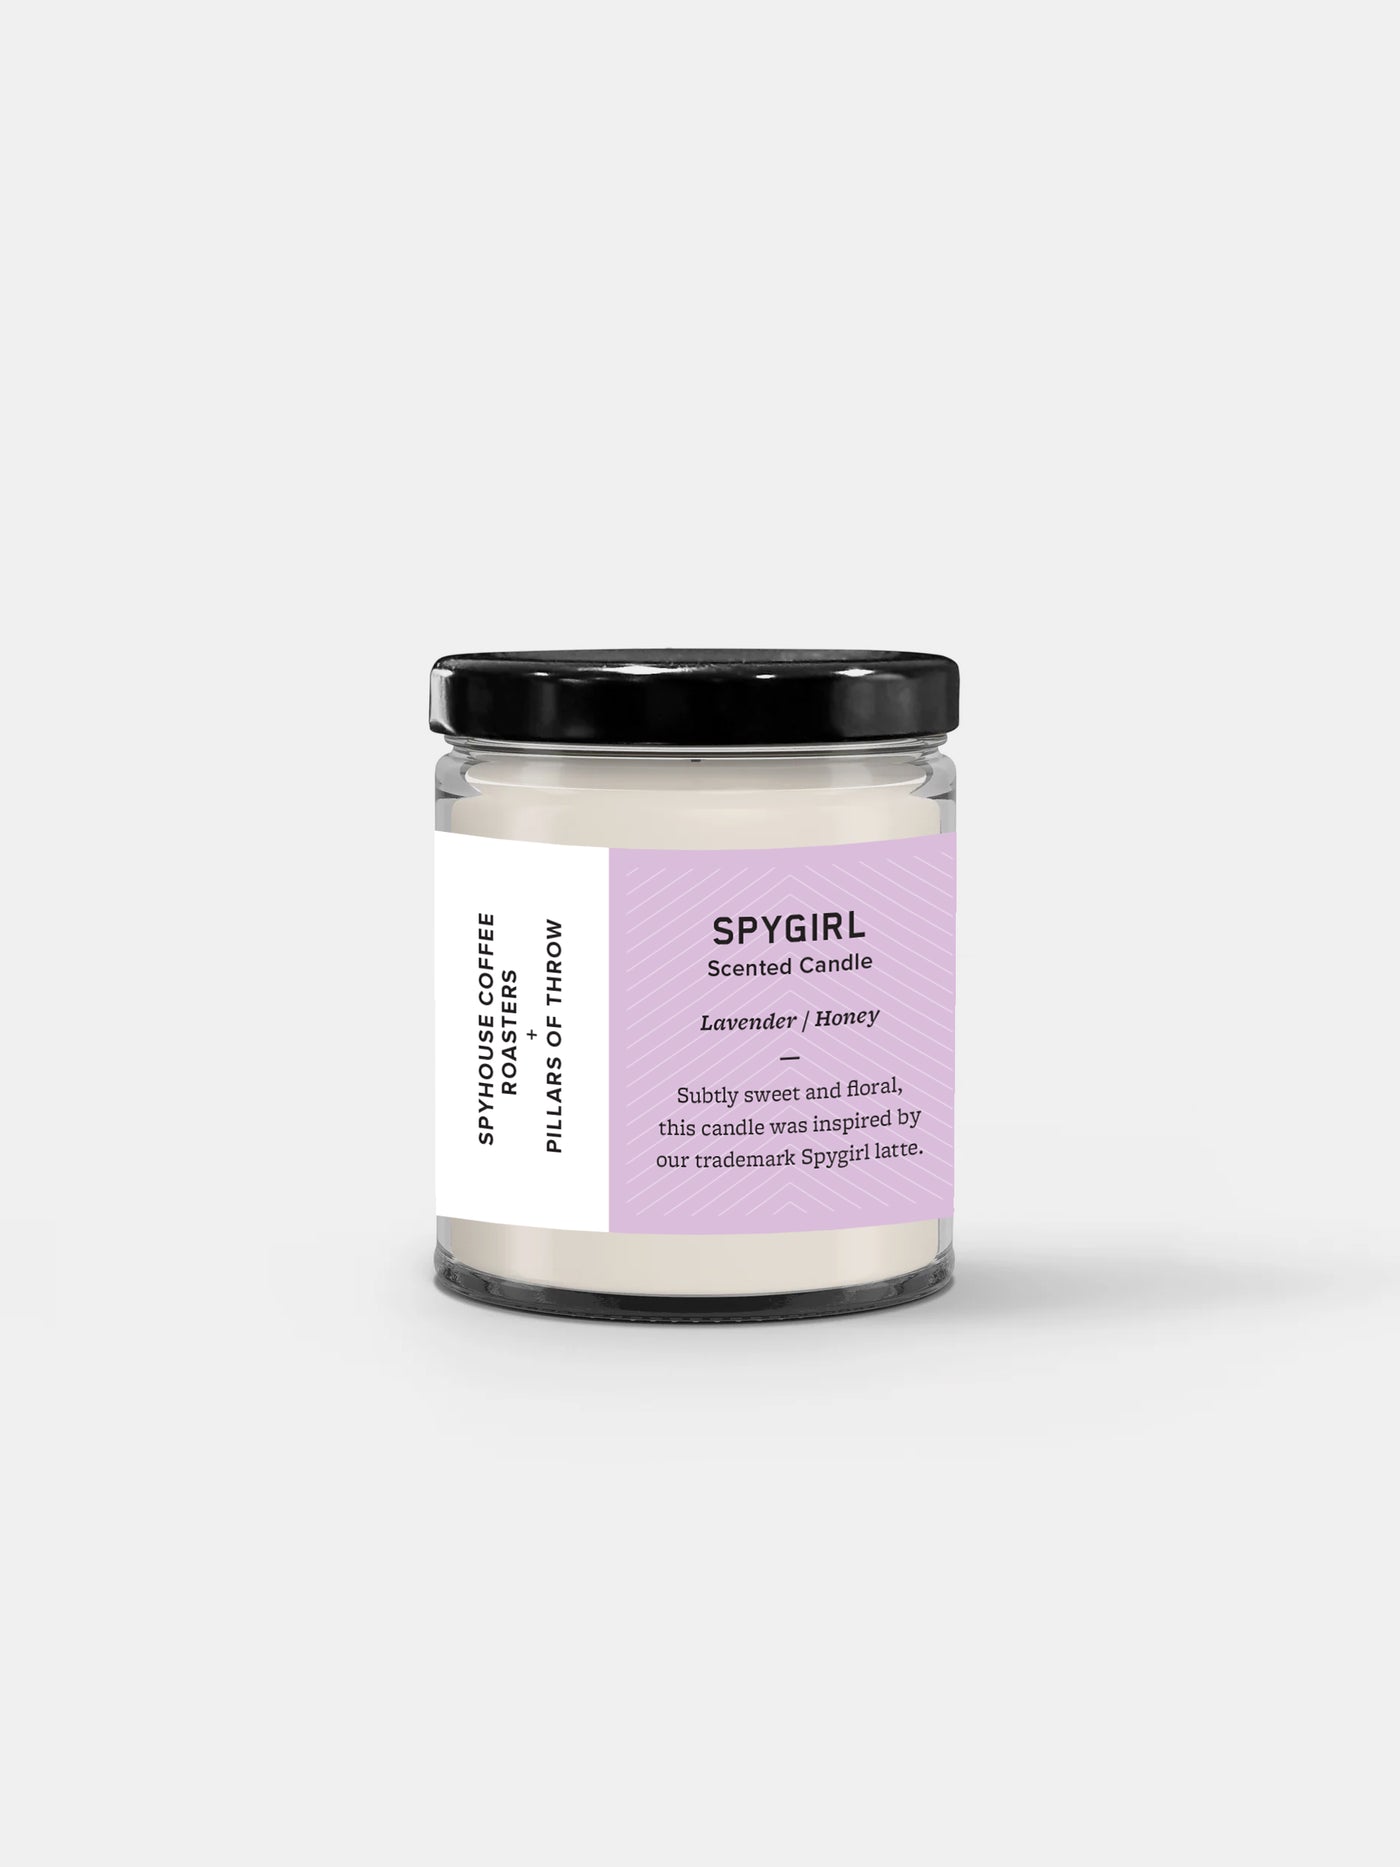 Spygirl Scented Candle